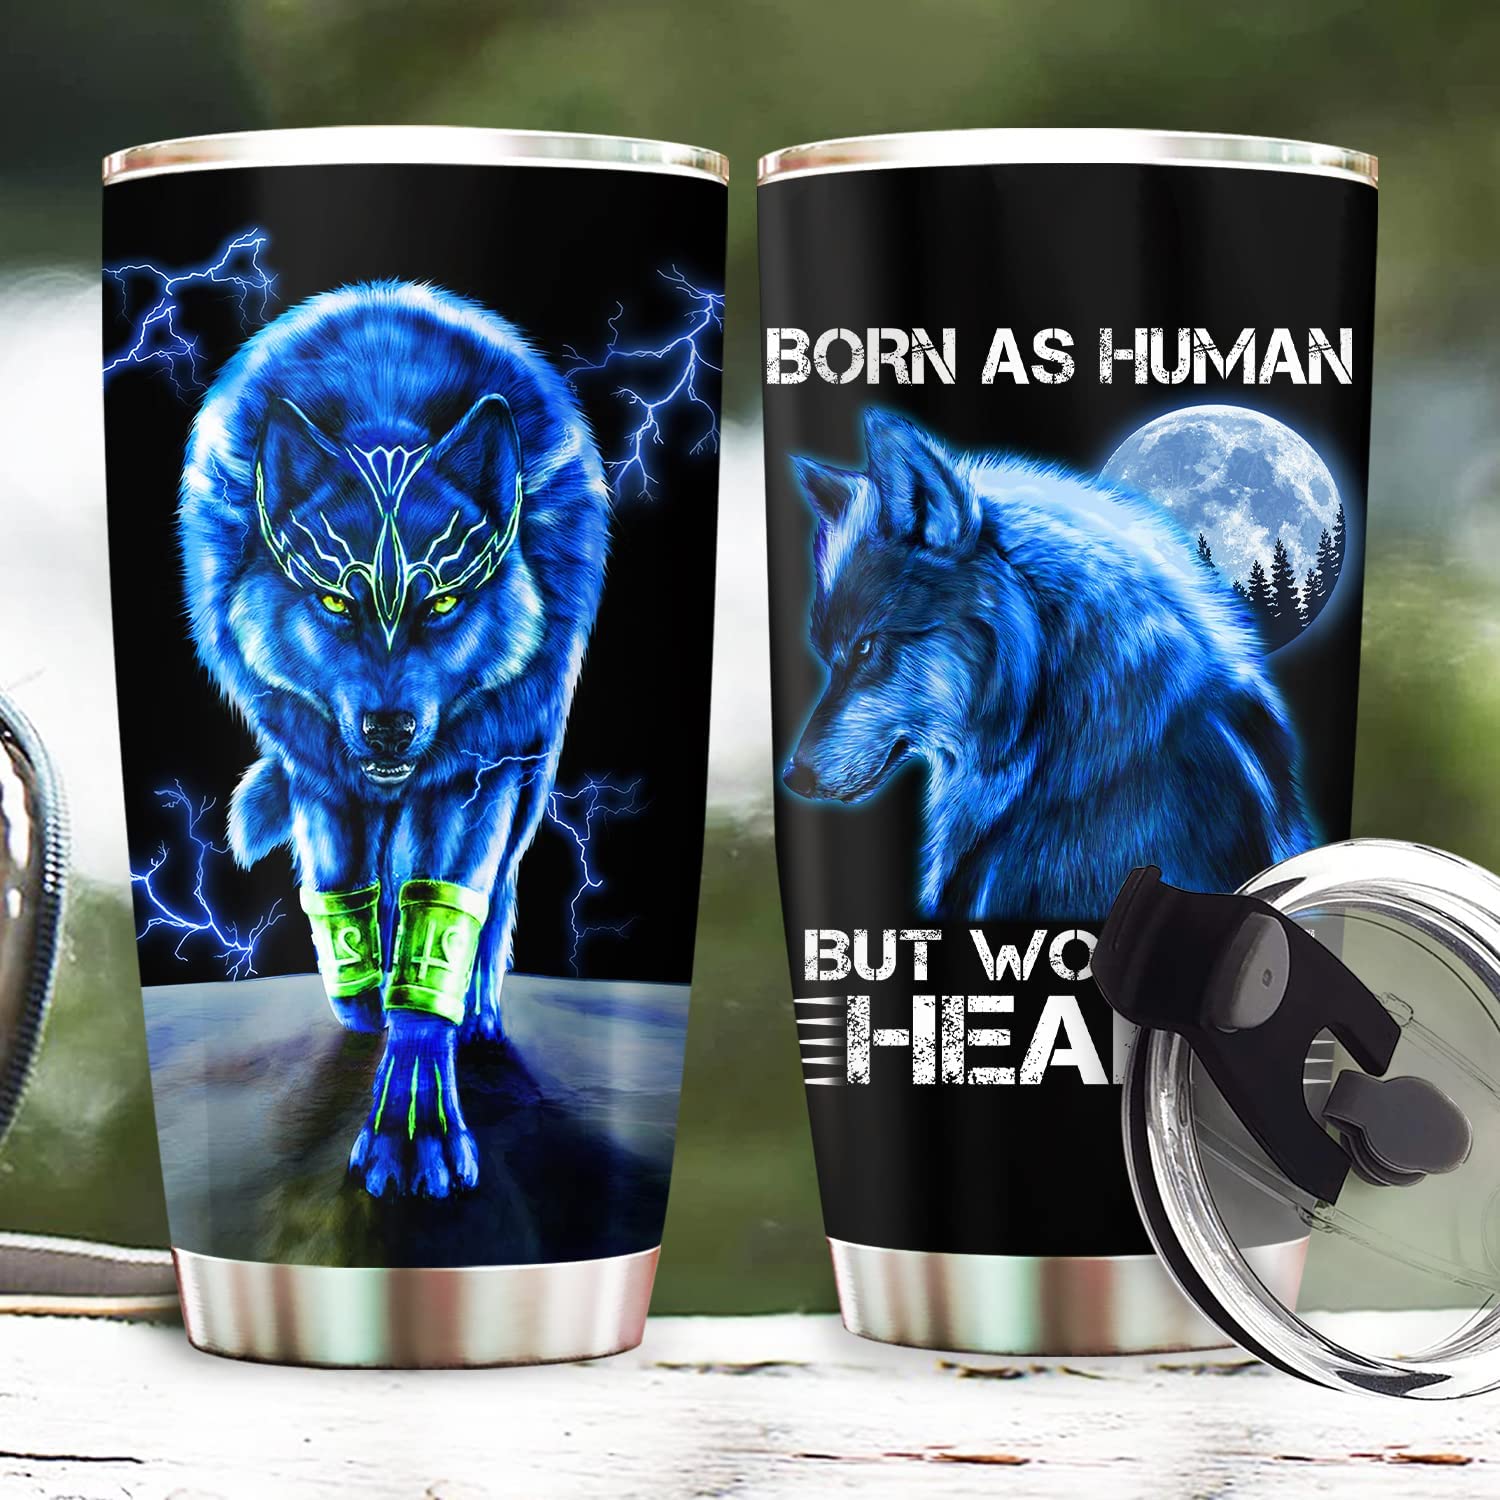 Wolf Tumbler Born As Human But Wolf At Heart Tumbler, Blue Wolf Gifts For Men Dad Papa on Christmas Birthday Fathers Day 20oz Stainless Steel Tumbler Cup with Lid Cold & Hot Water Coffee